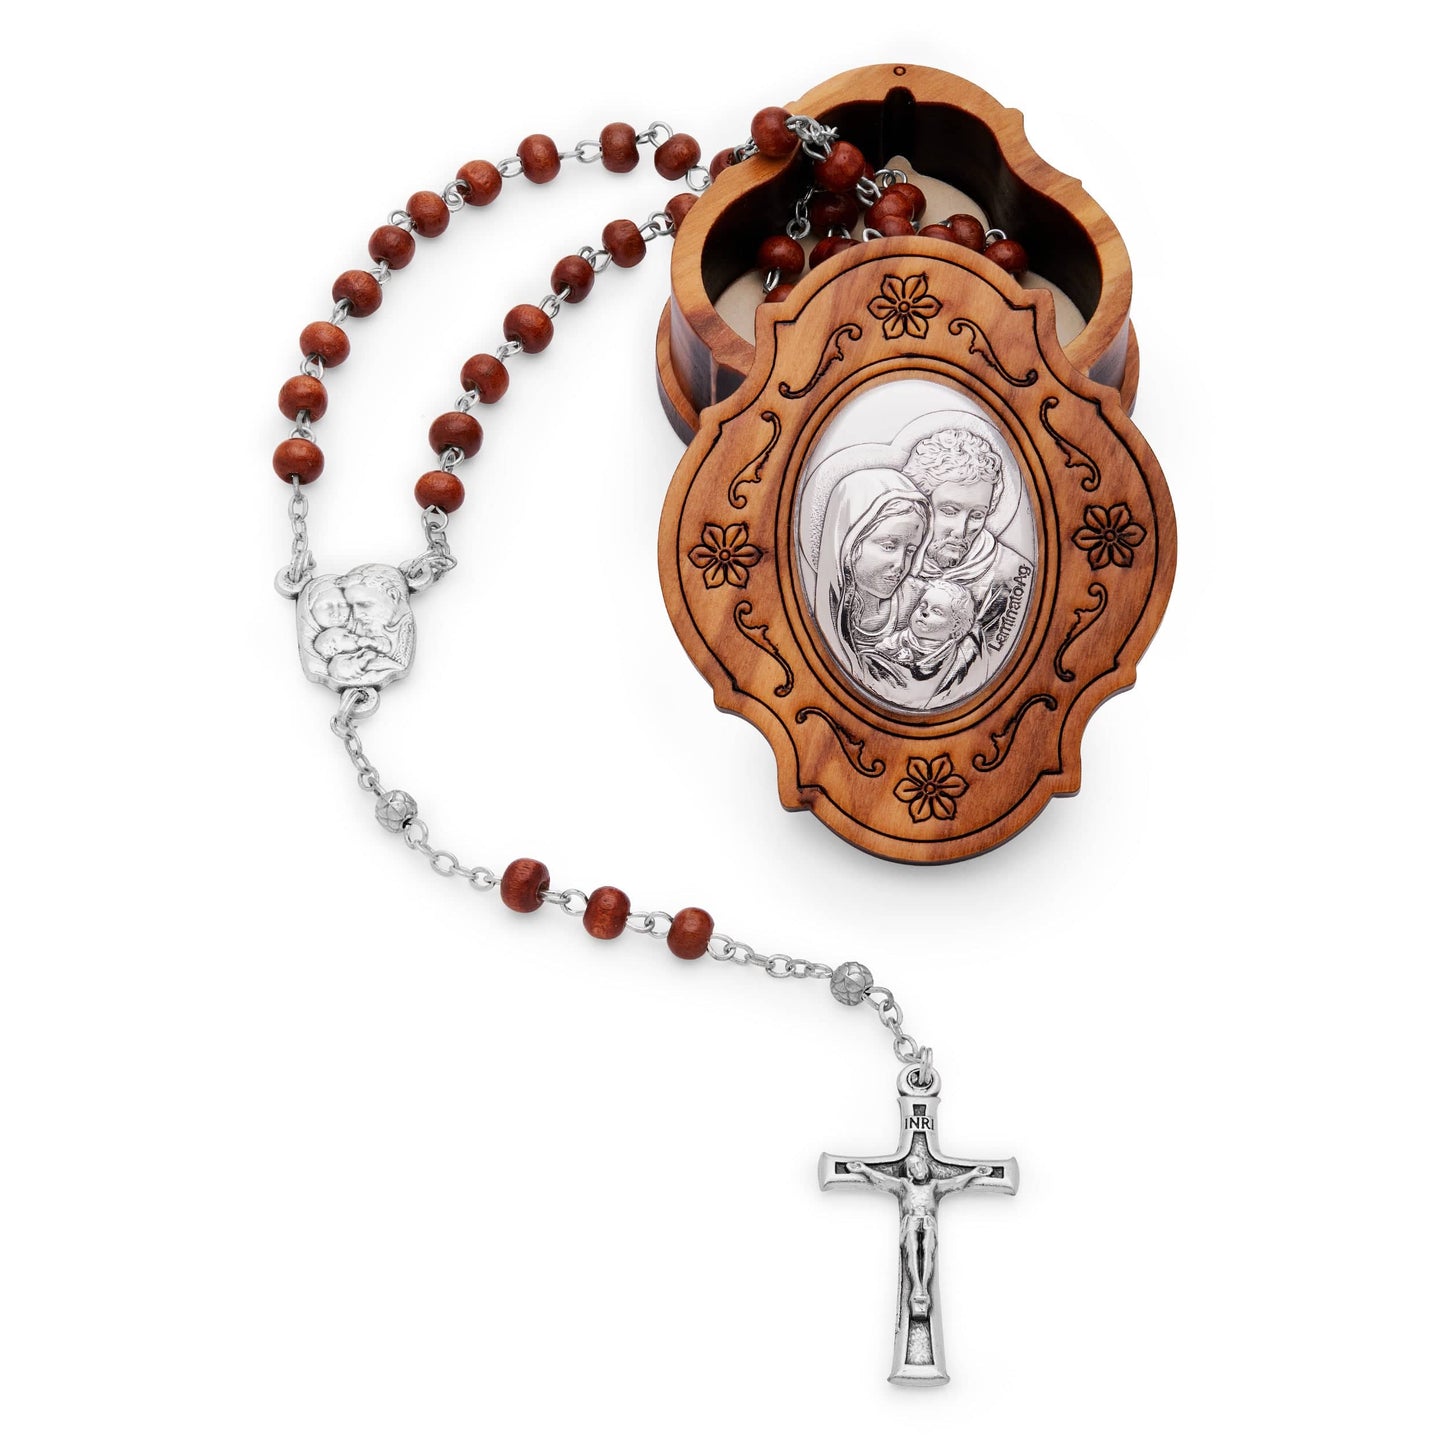 MONDO CATTOLICO Prayer Beads 38 cm (15 in) / 4 mm (0.15 in) Holy Family Keepsake Wooden Case and Rosary